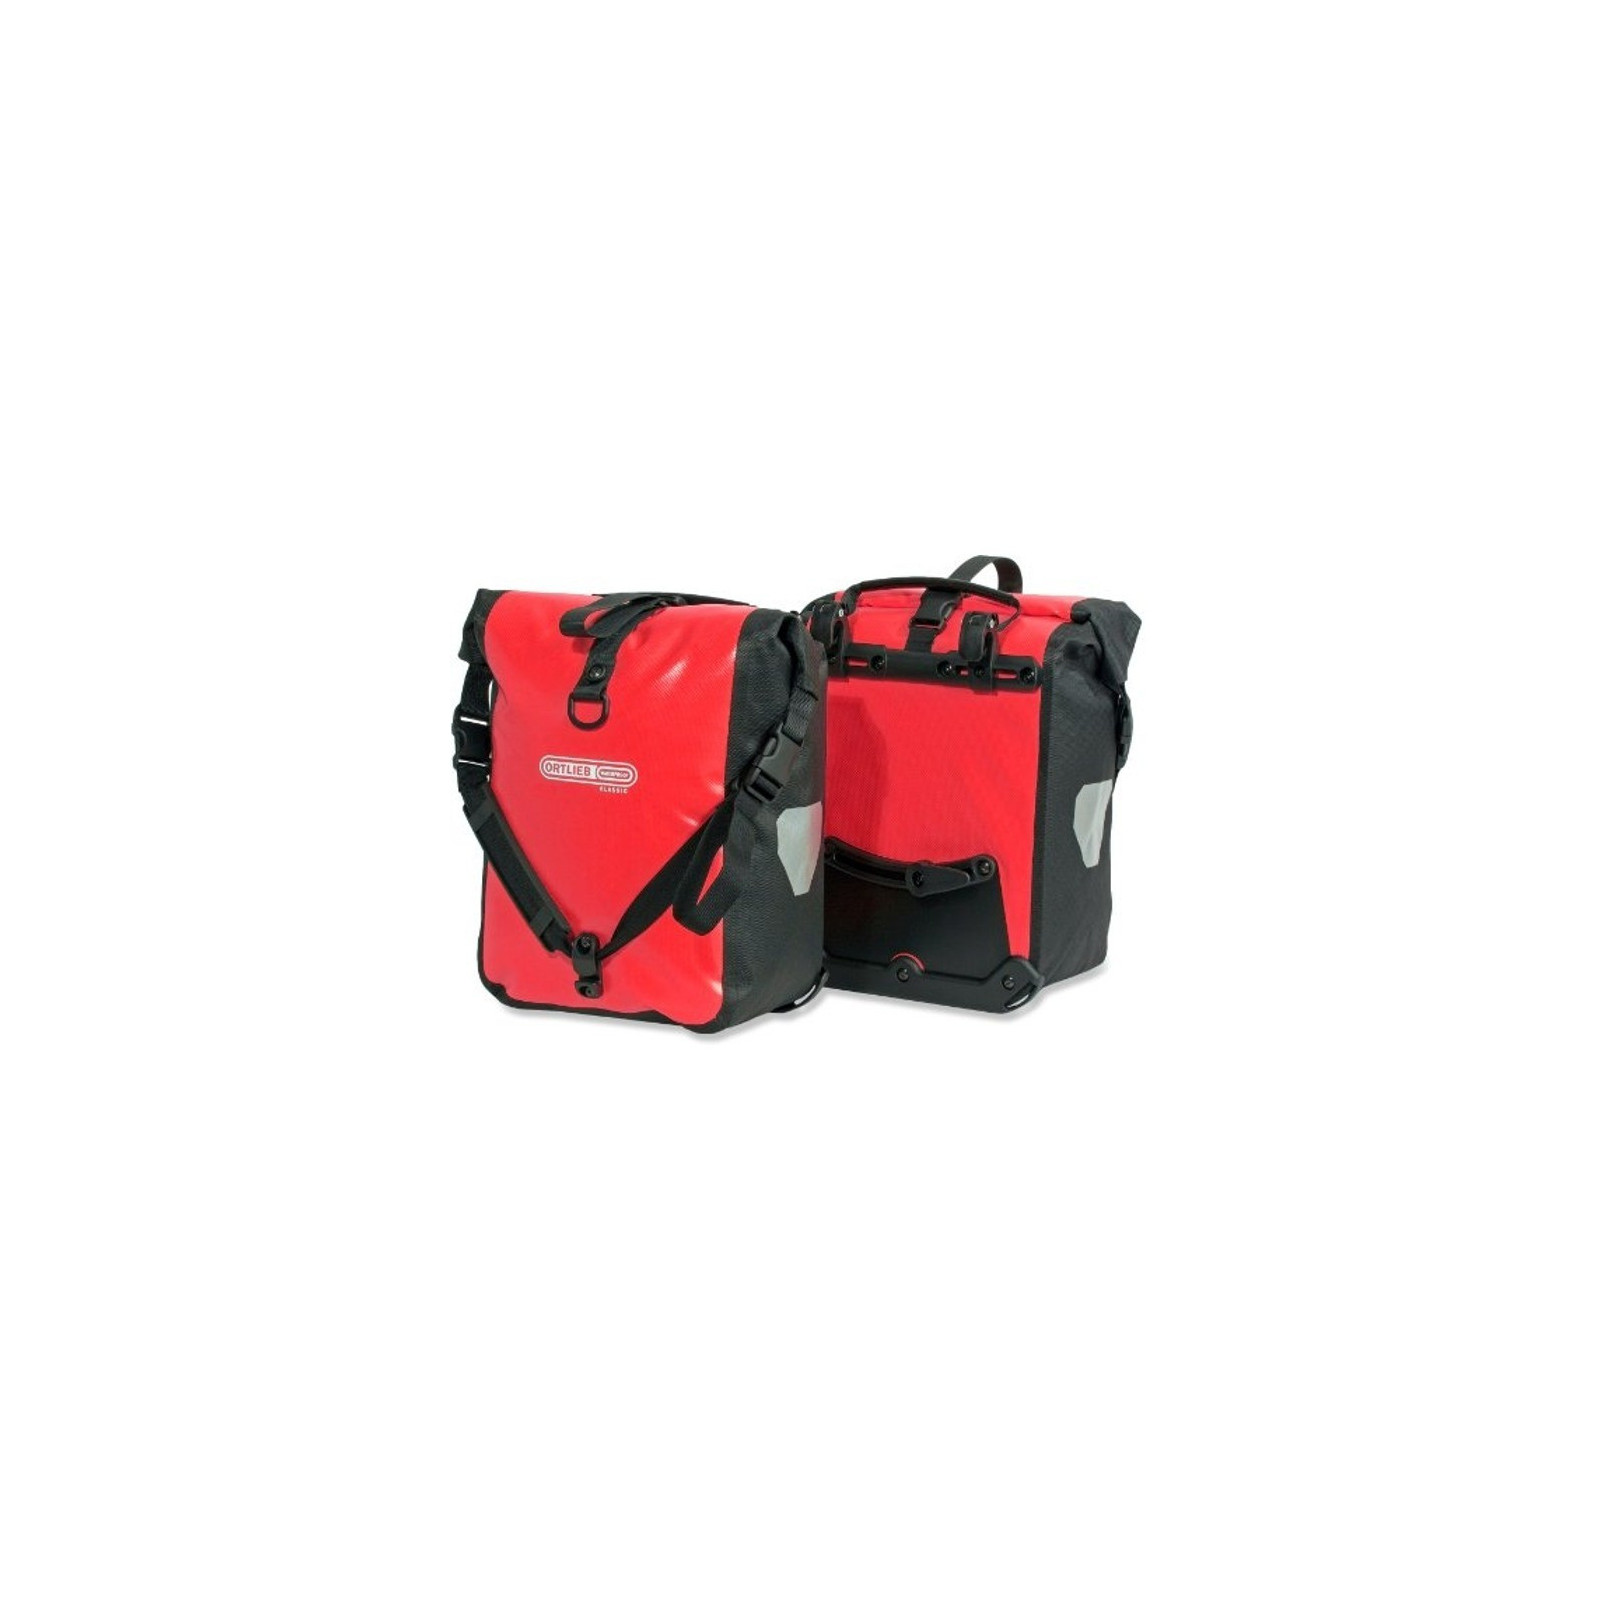 Billy les bar Ortlieb Sport-Roller Classic Bike Panniers - Red - Pair